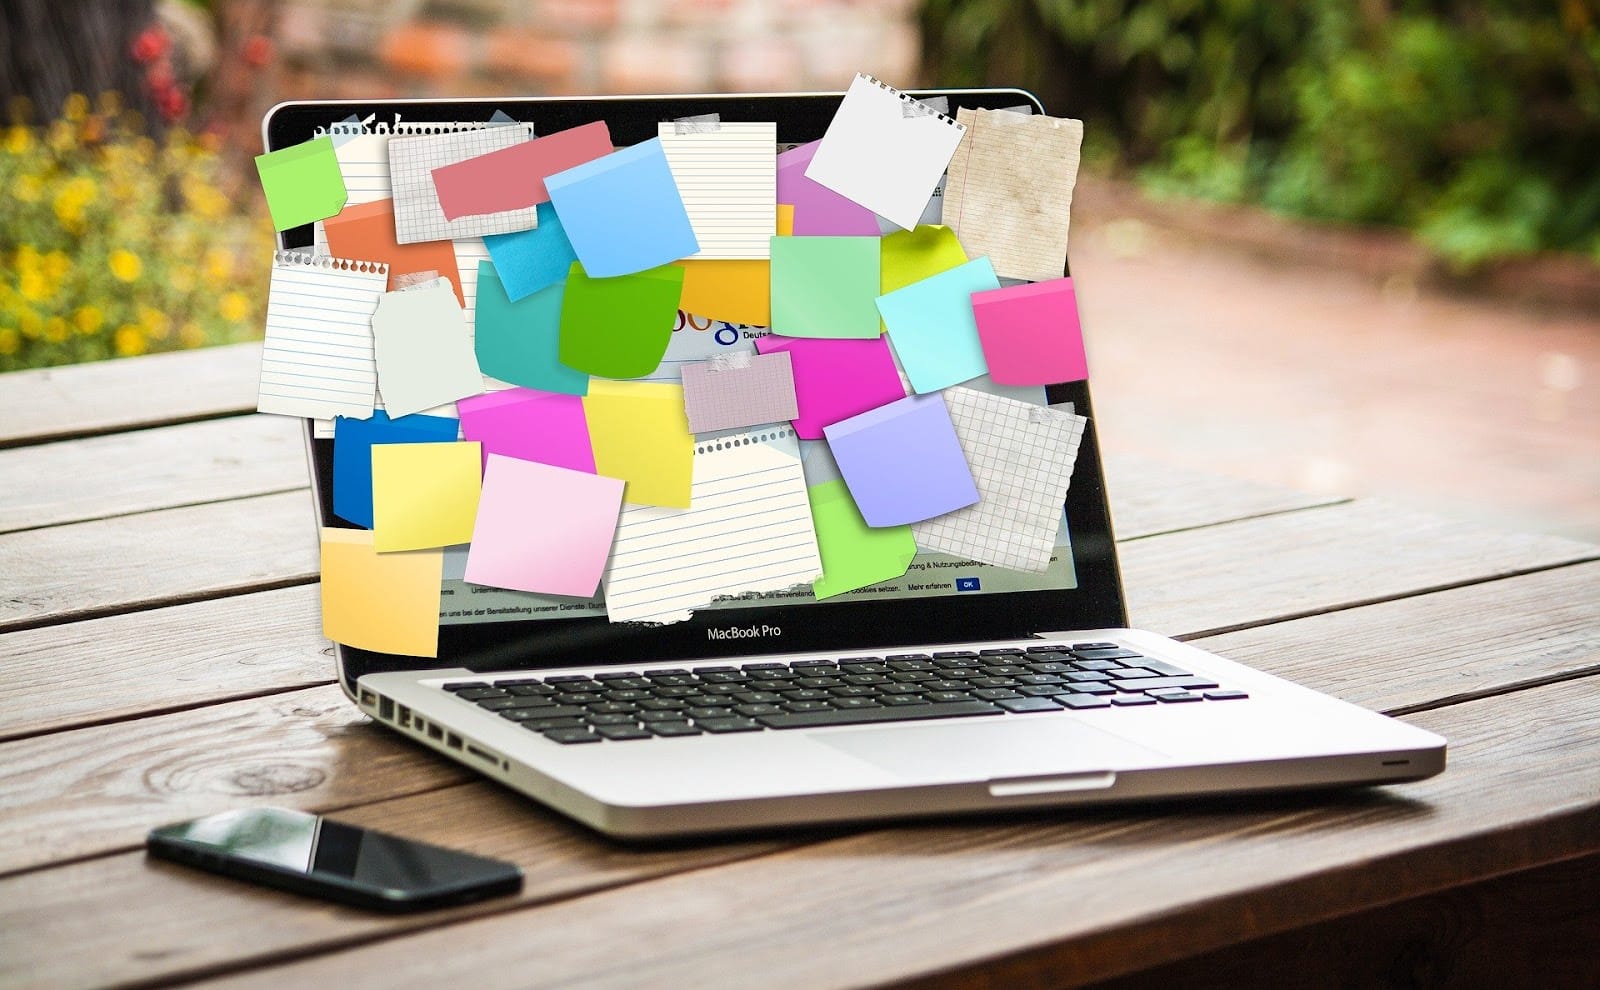 Laptop with post-it notes Bar exam study